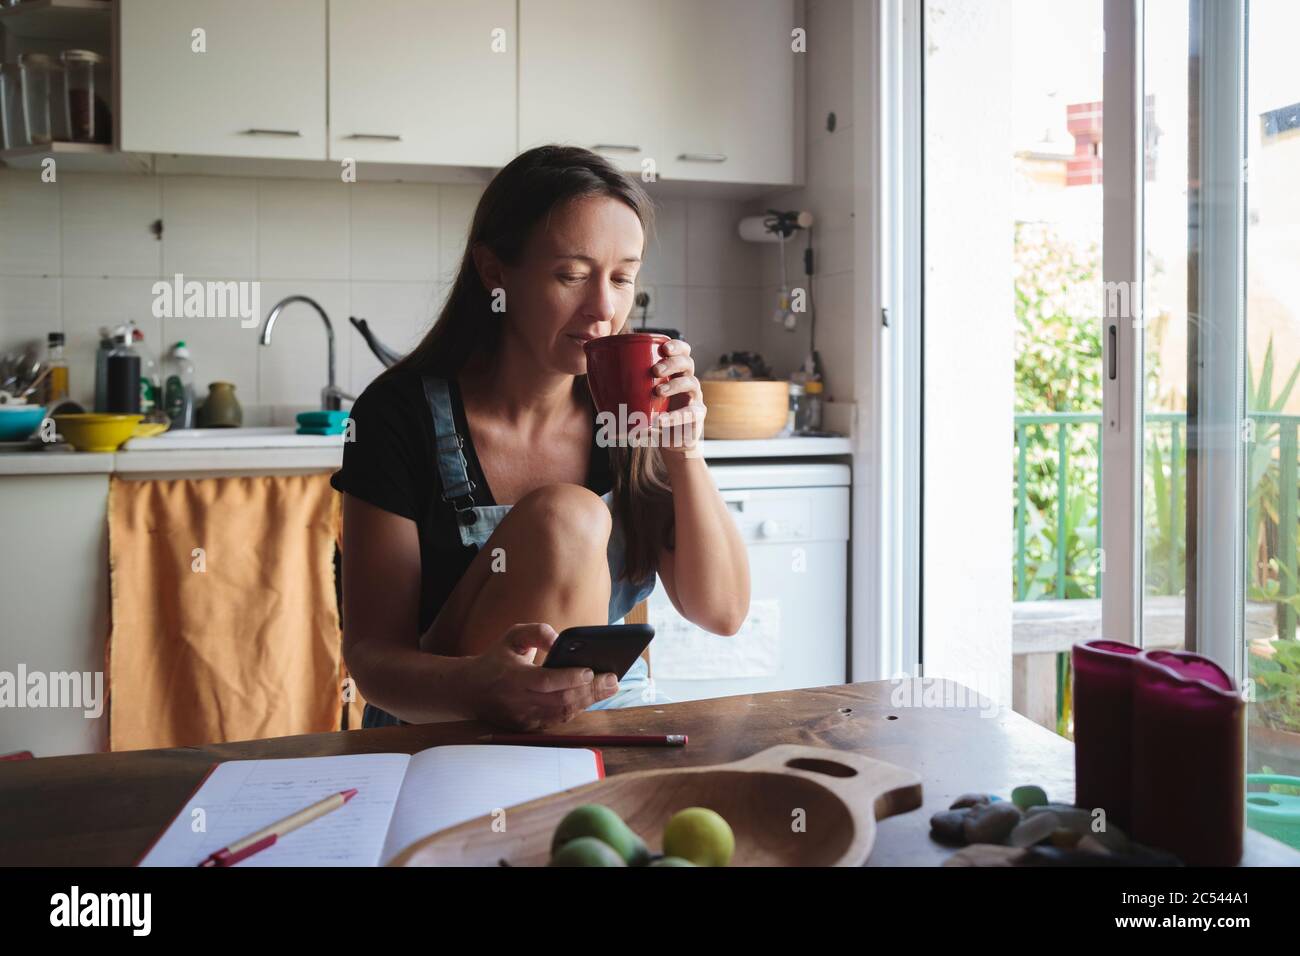 Young woman sitting on a wooden kitchen table with relaxed atmosphere checking her smartphone and writing notes; concept natural lifestyle, simplicity Stock Photo